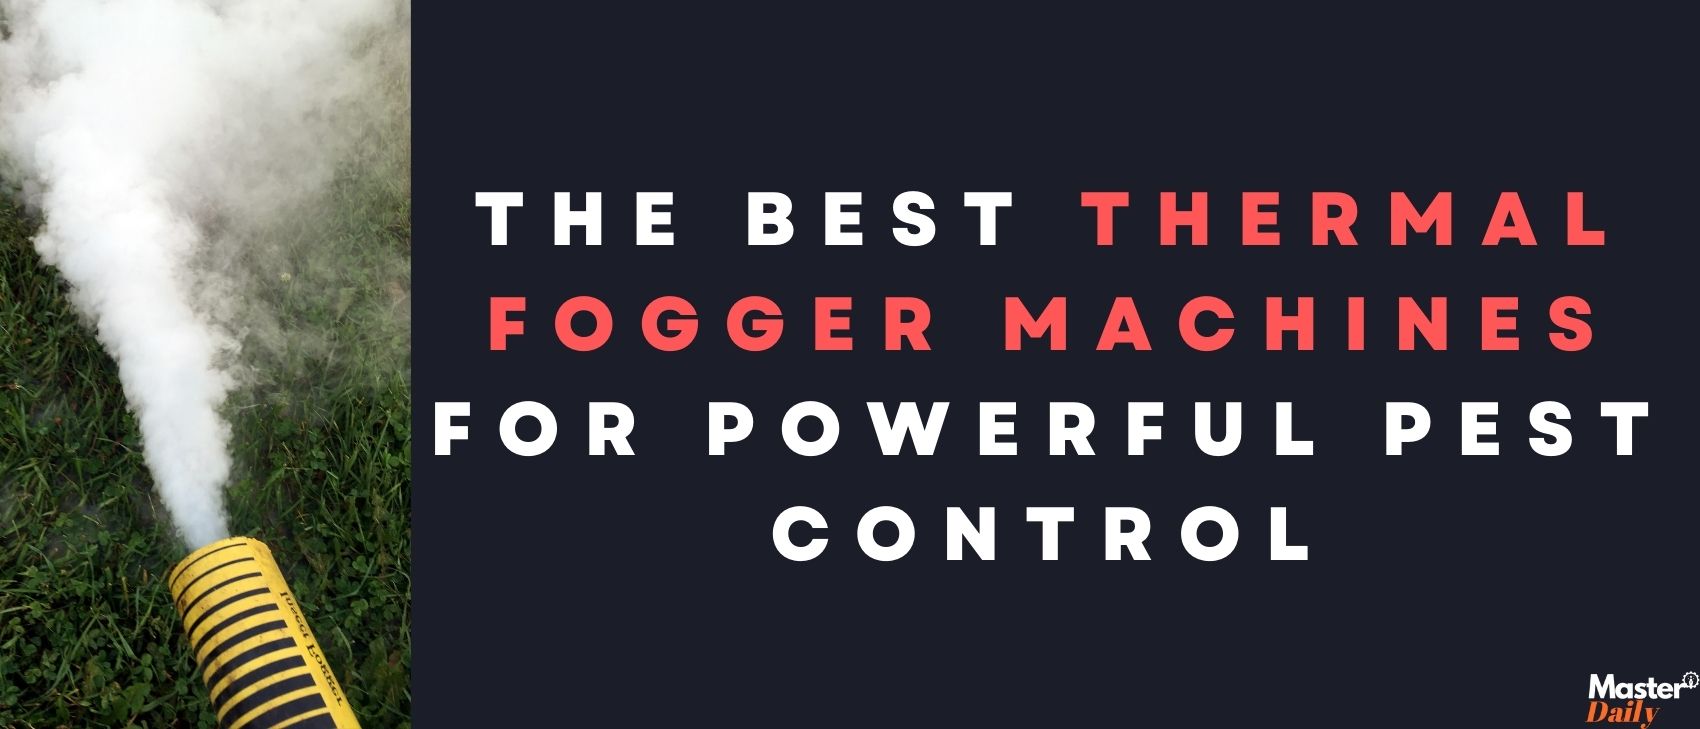 Best Thermal Fogger Machines For Powerful Pest Control